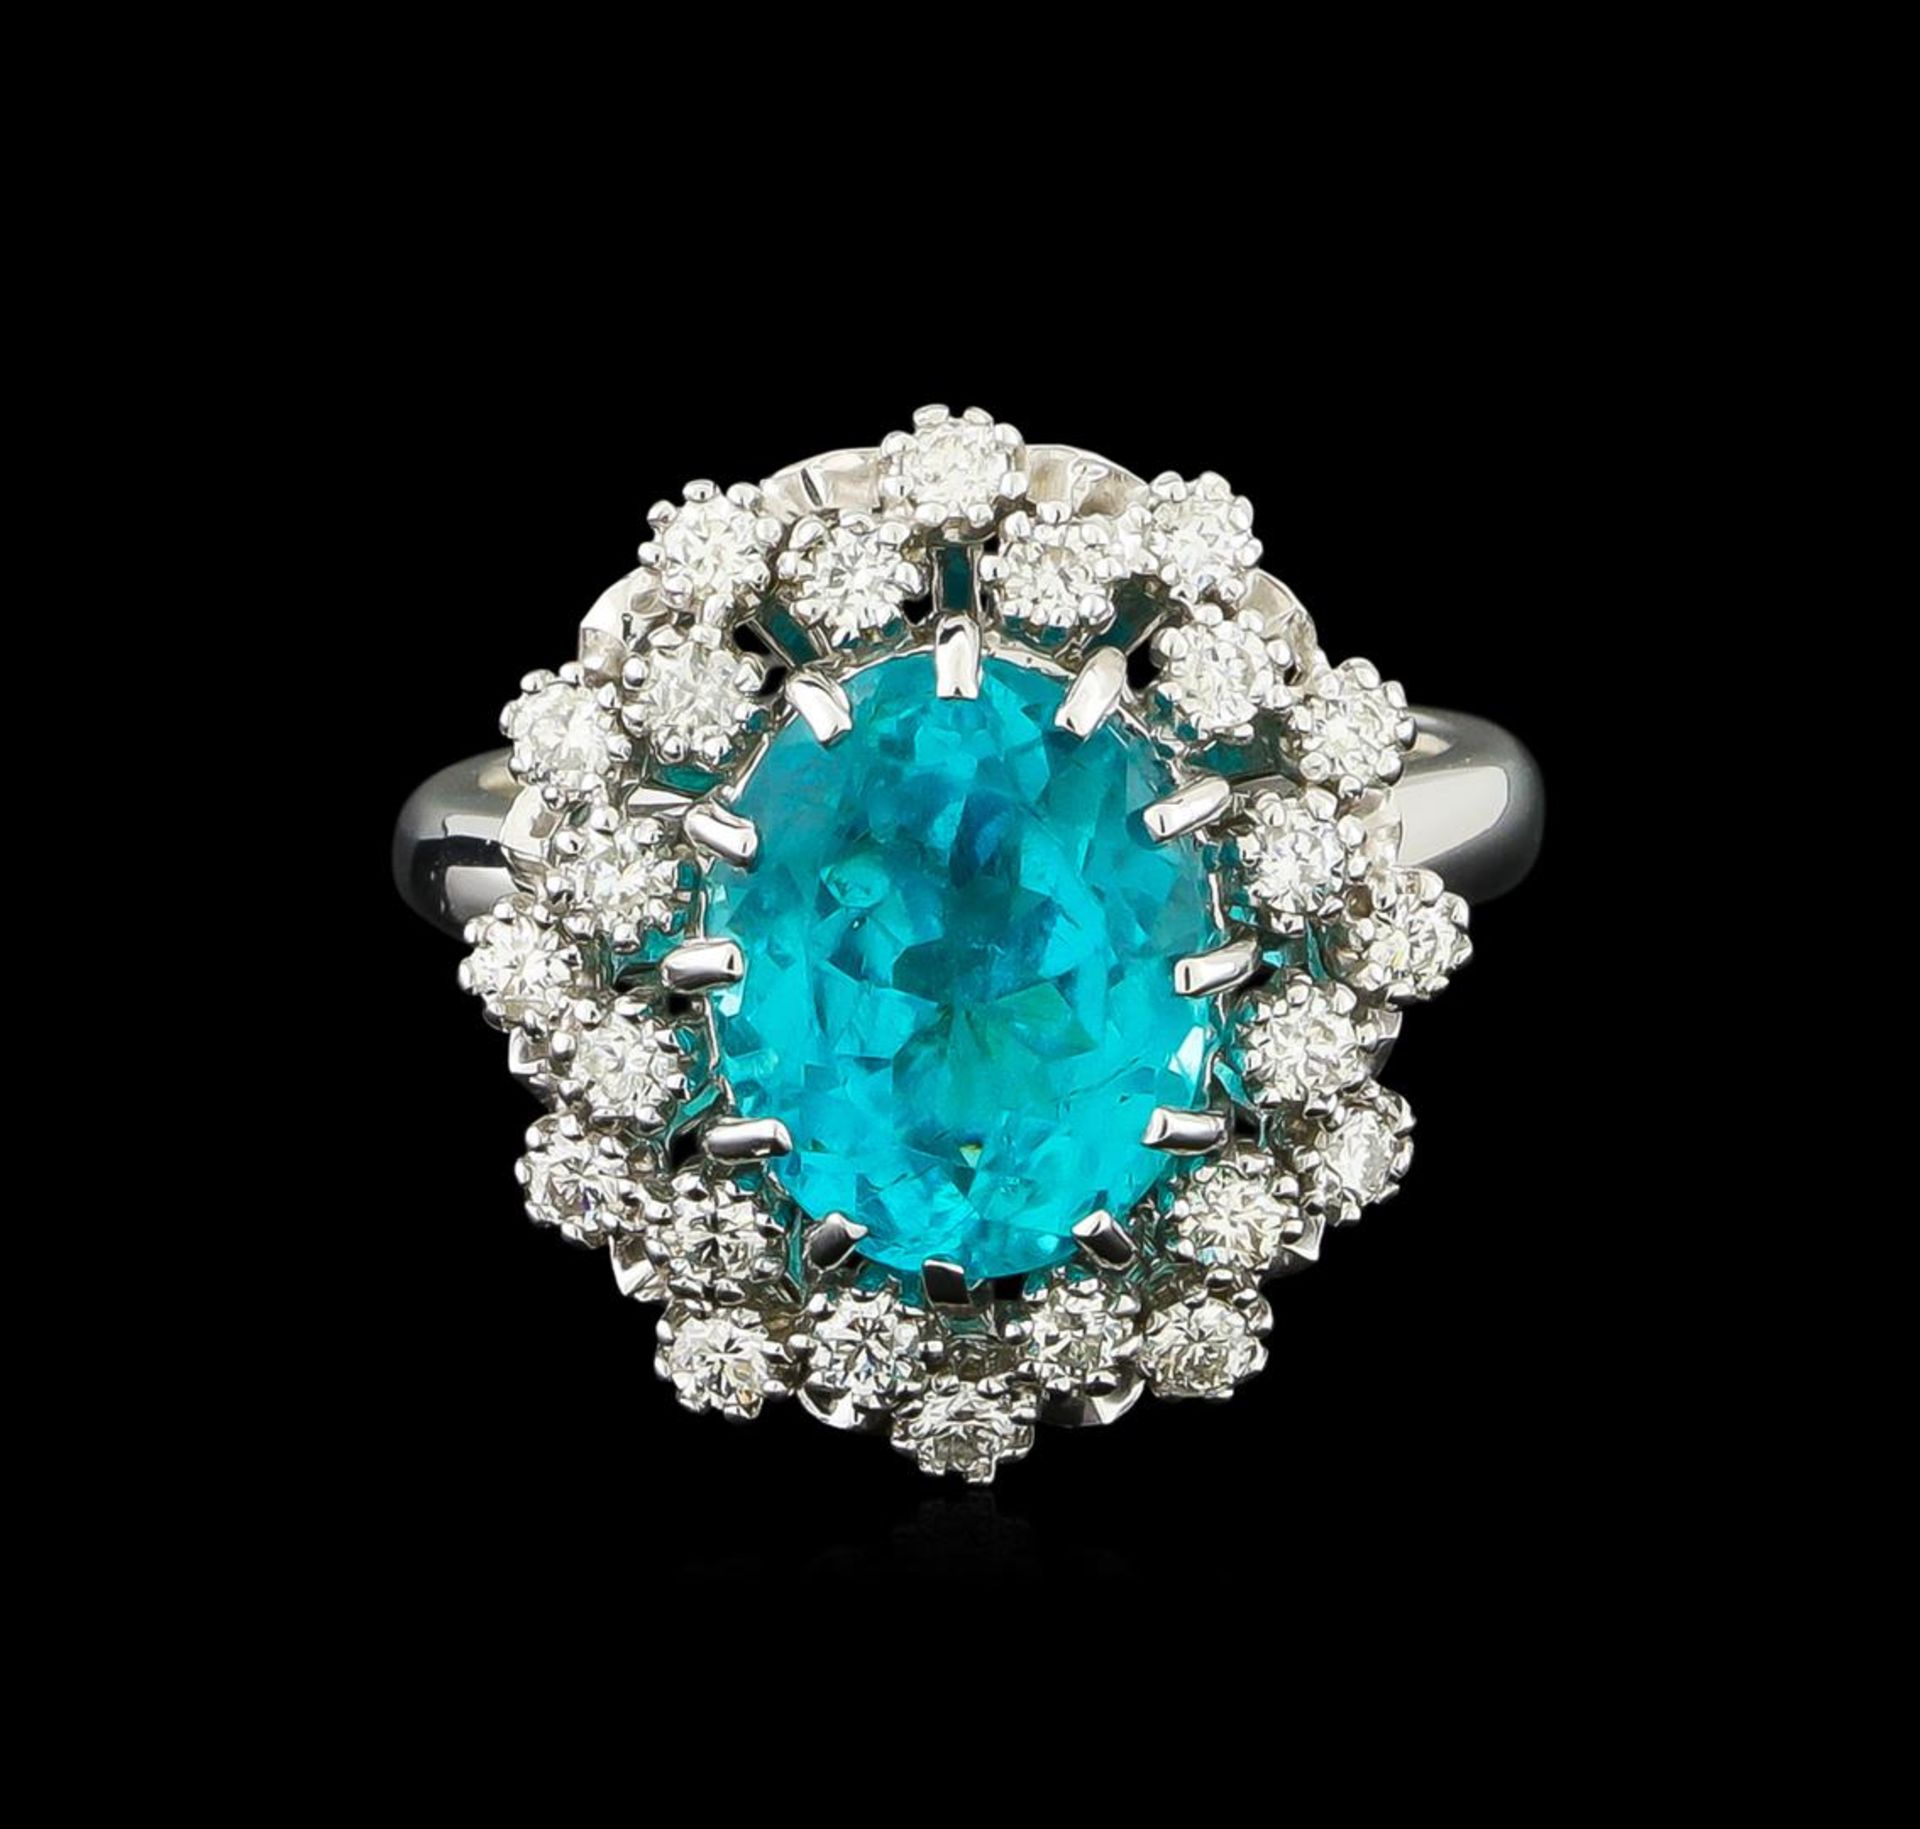 4.08 ctw Apatite and Diamond Ring - 14KT White Gold - Image 2 of 4